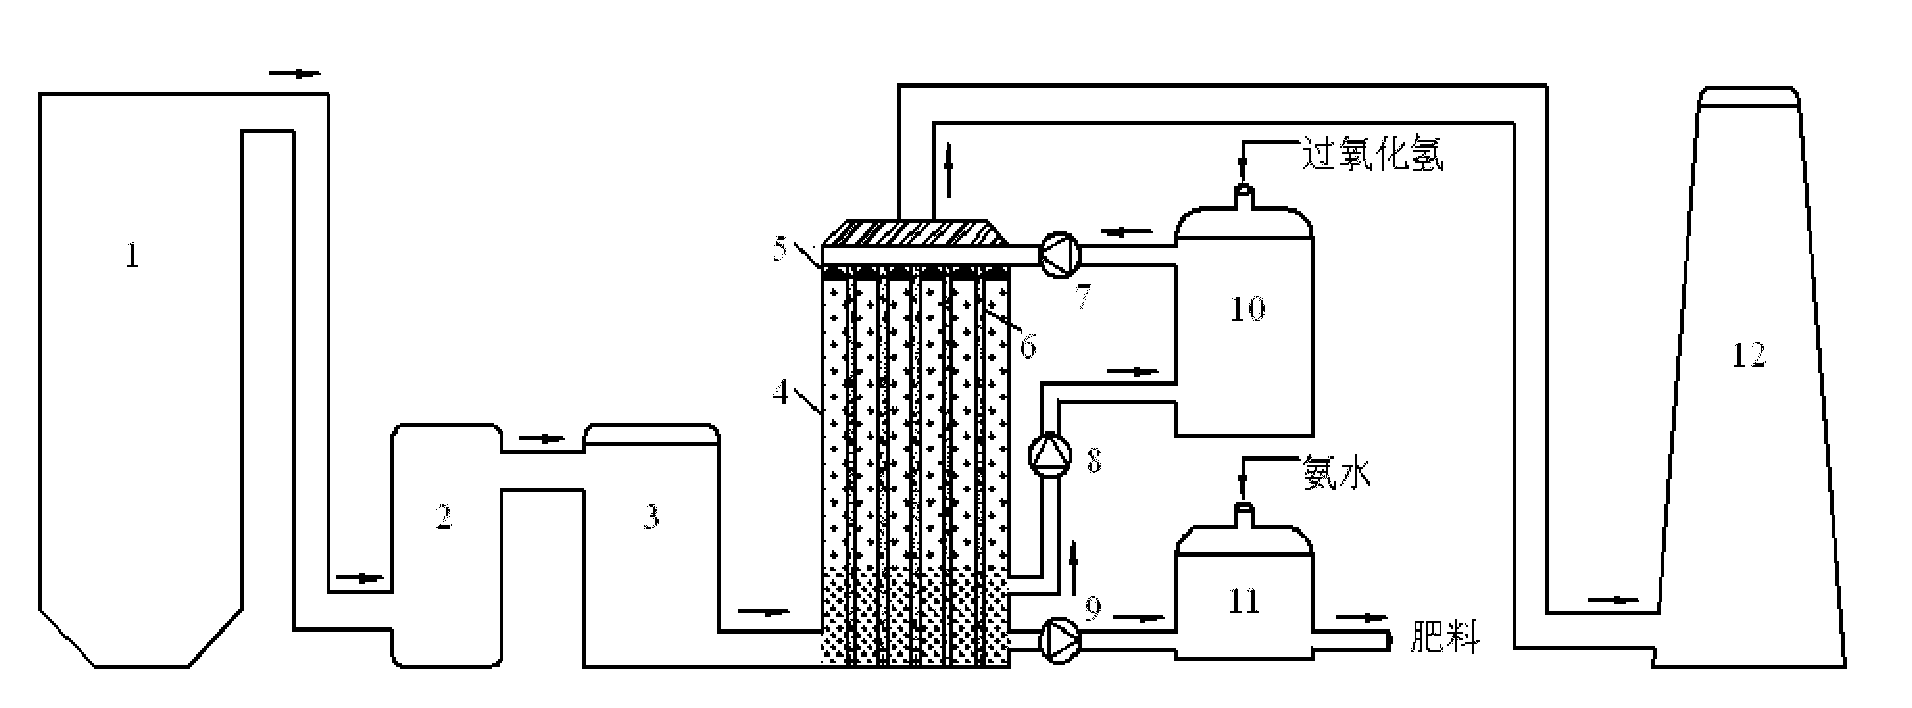 Photochemical advanced oxygenation-based simultaneous desulfuration and denitration system